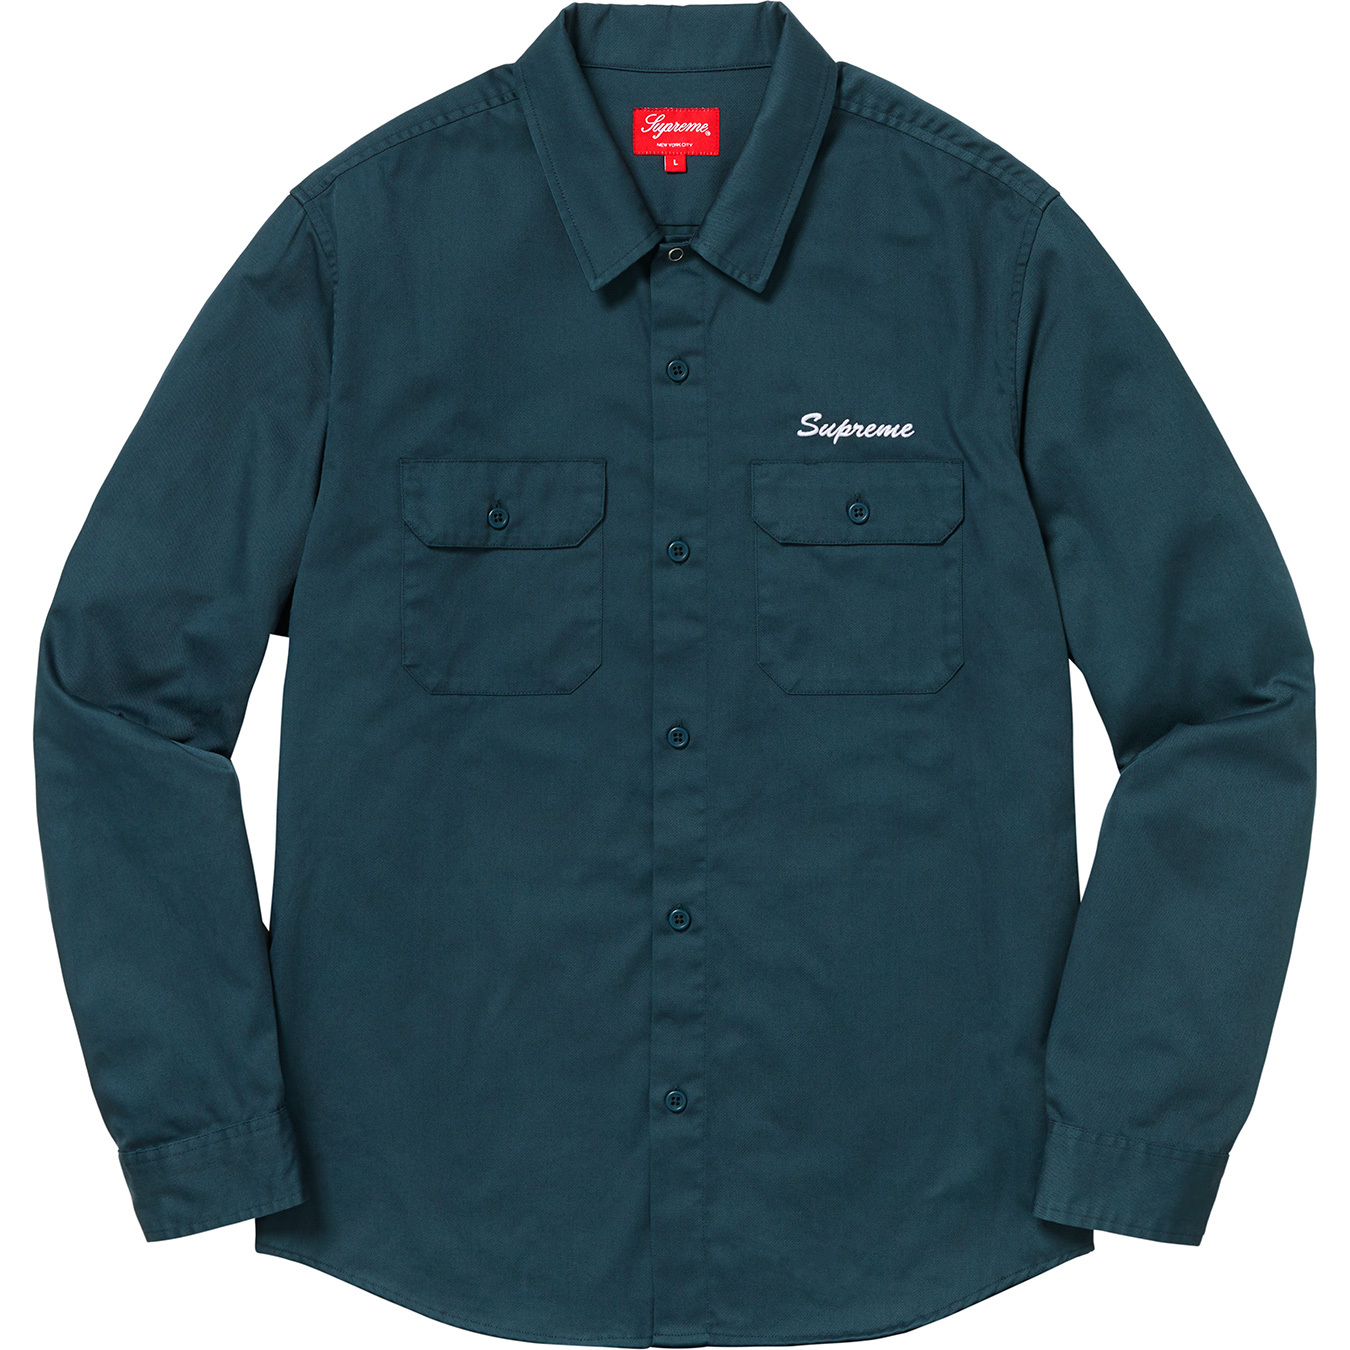 Mike Kelley Ahh…Youth! Work Shirt - fall winter 2018 - Supreme